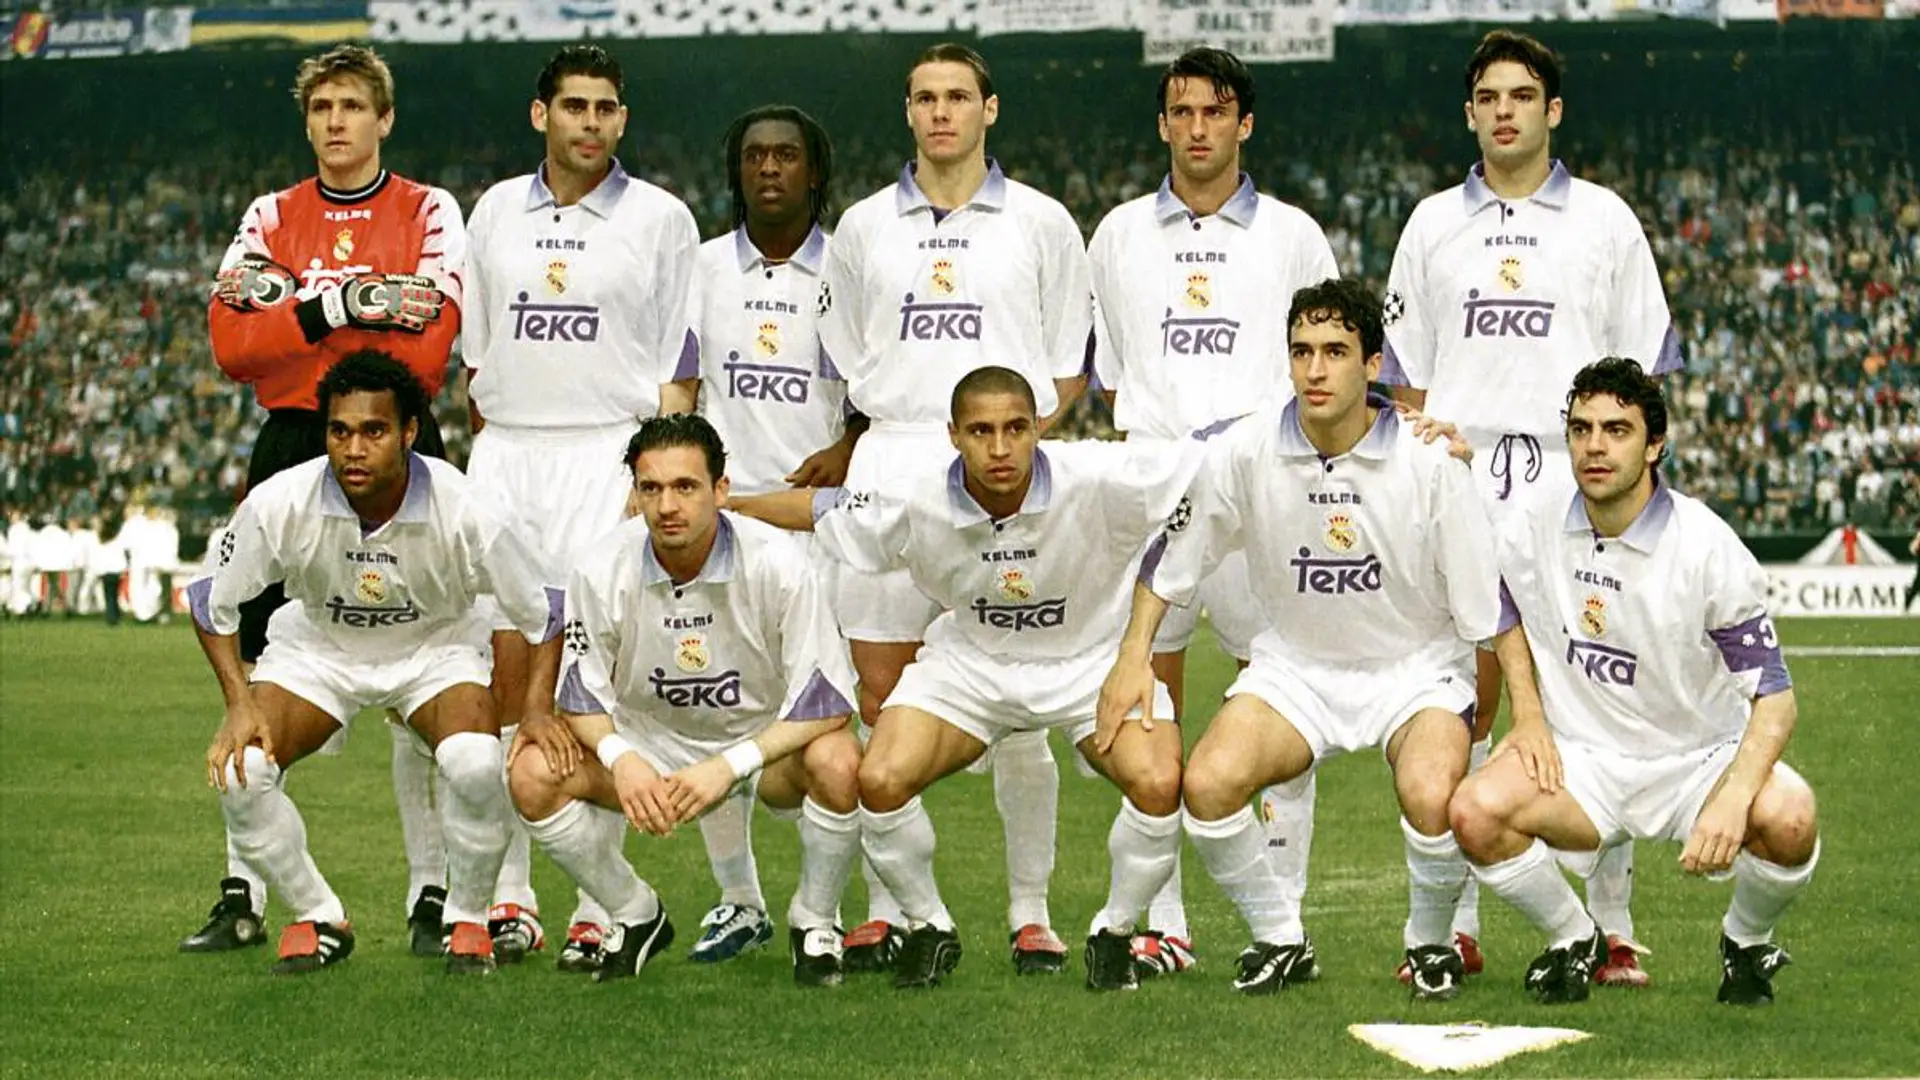 Real Madrid from 1997/1998 season - how many players do you recognize?